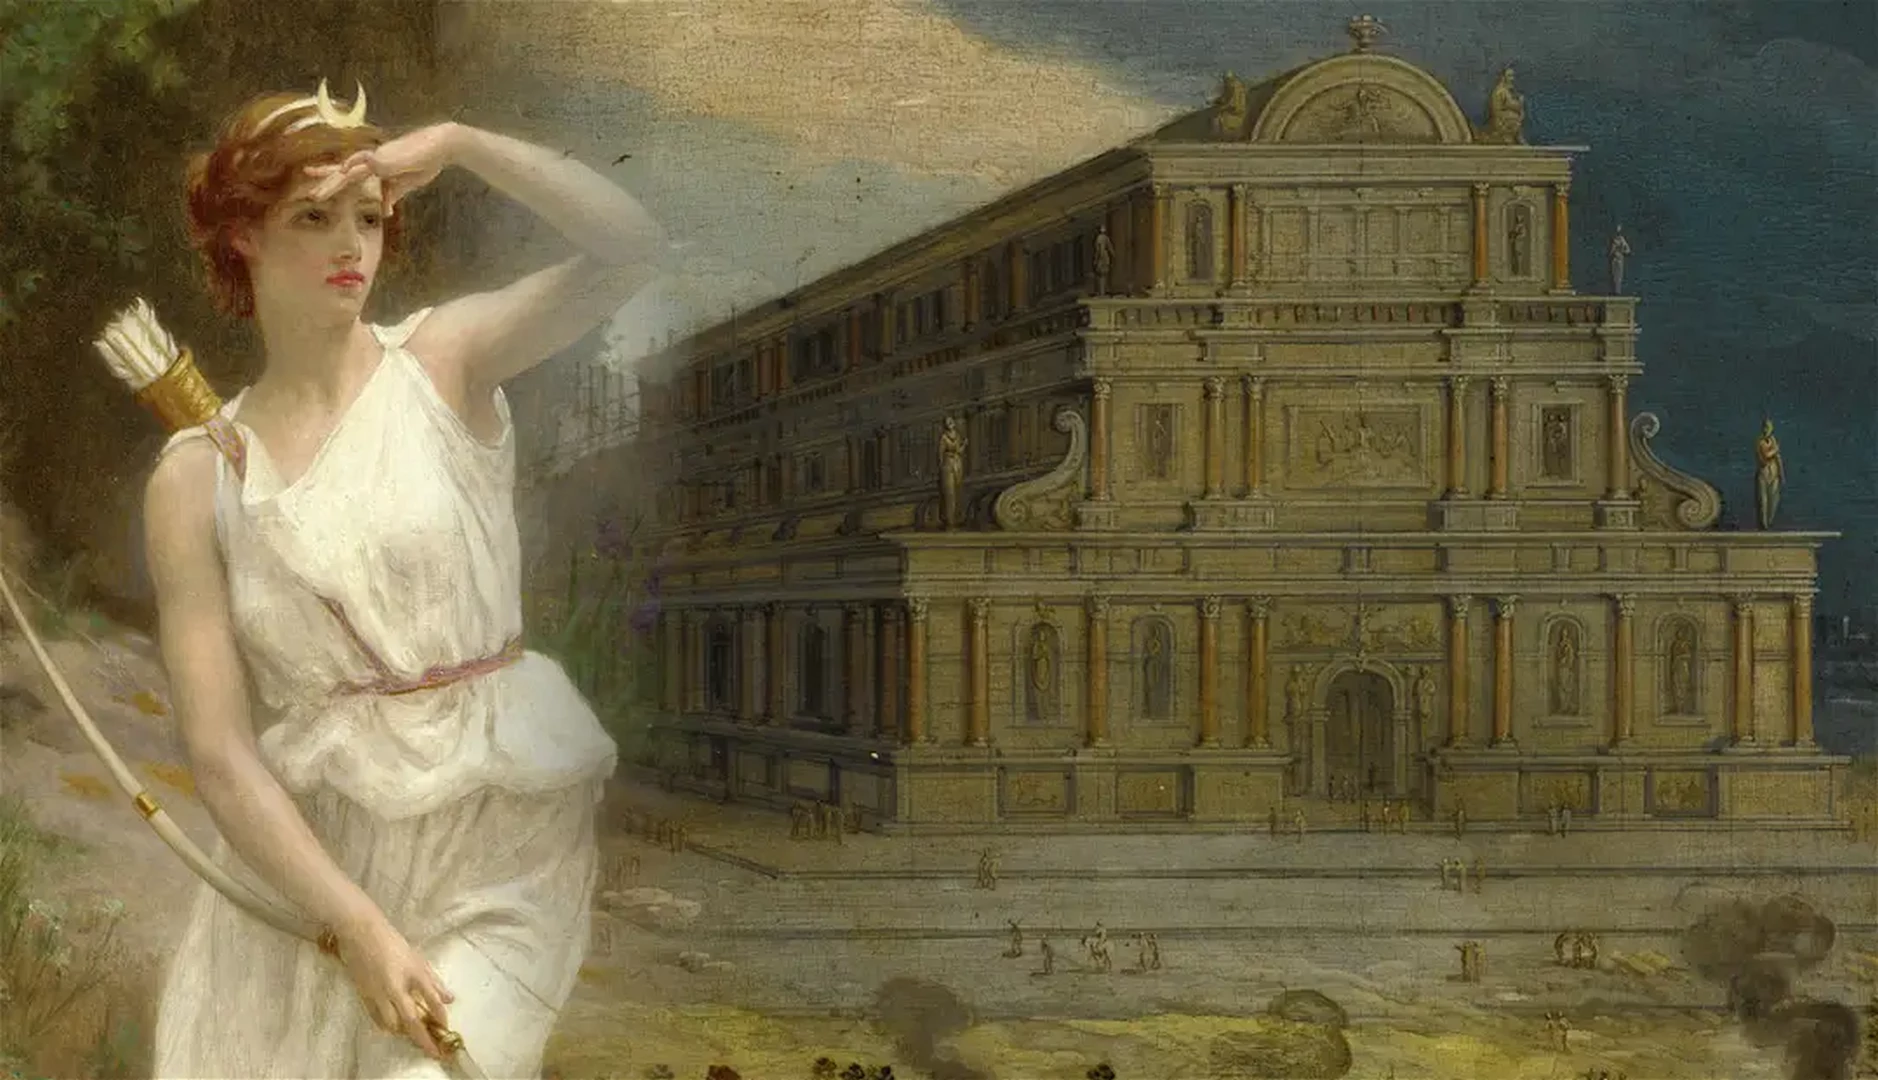 Temple of Artemis at Ephesus: The History of an Architectural Marvel